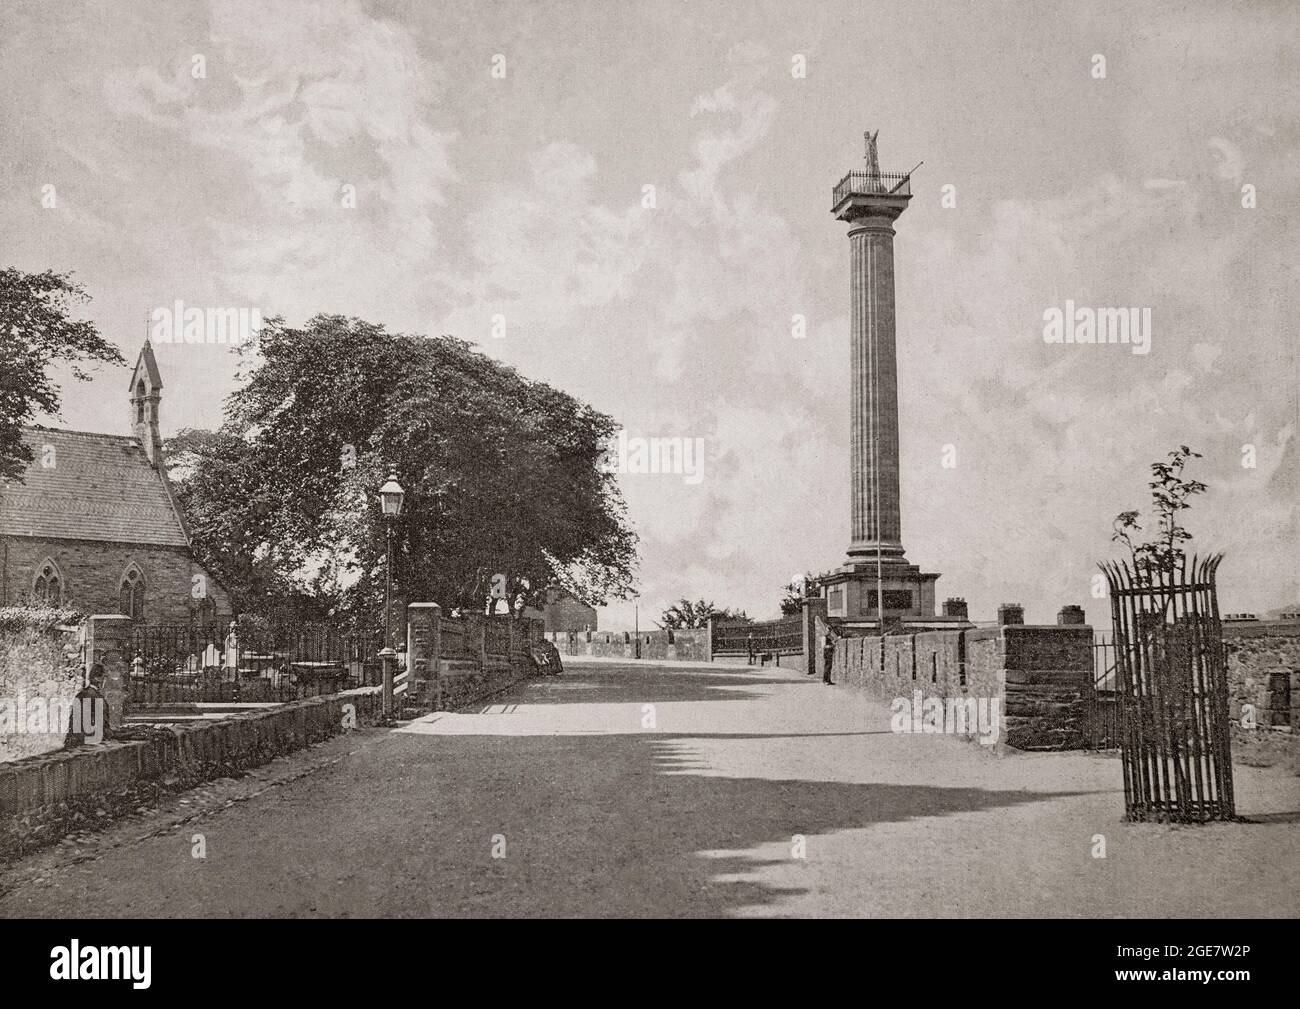 A late 19th century view of the former Walker's Monument or Pillar in Derry City, aka Londonderry City, the second-largest city in Northern Ireland. Completed in 1828 the pillar was a monument to the Rev George Walker who inspired the citizens to endure hardship during the Siege. It was later destroyed in 1973, by an explosion. Stock Photo